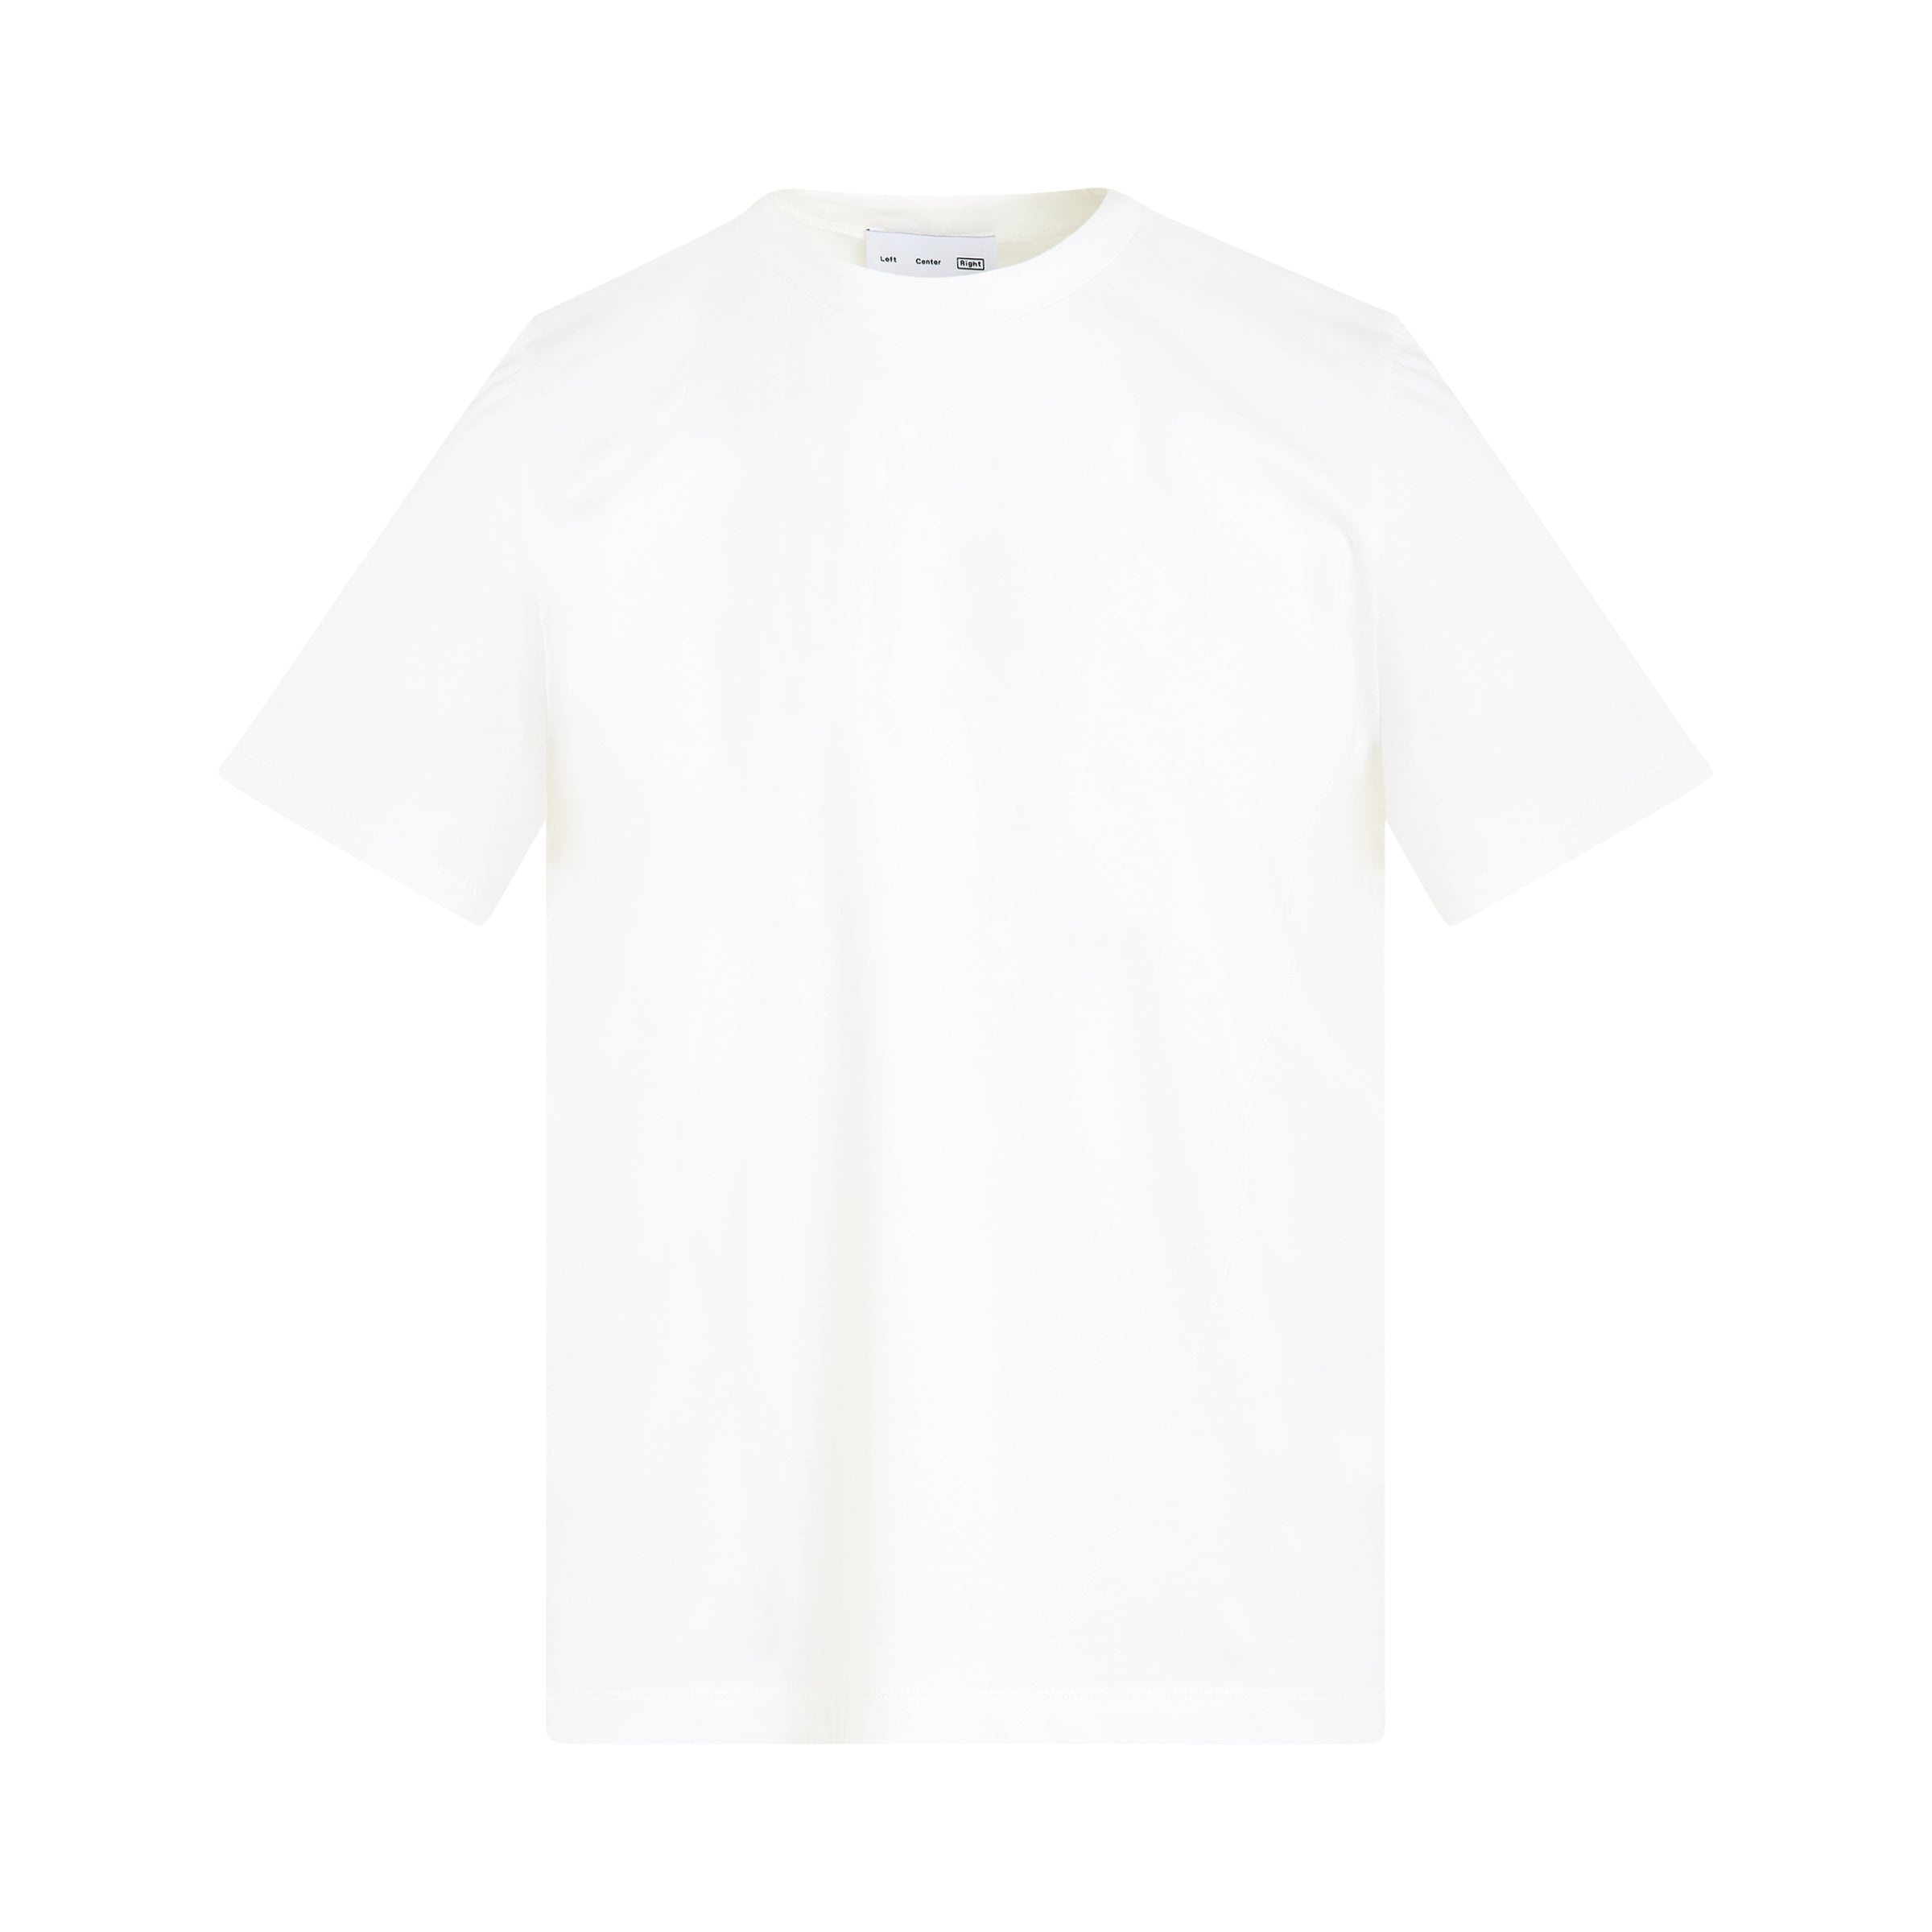 6.0 T-Shirt (Right) in White - 1